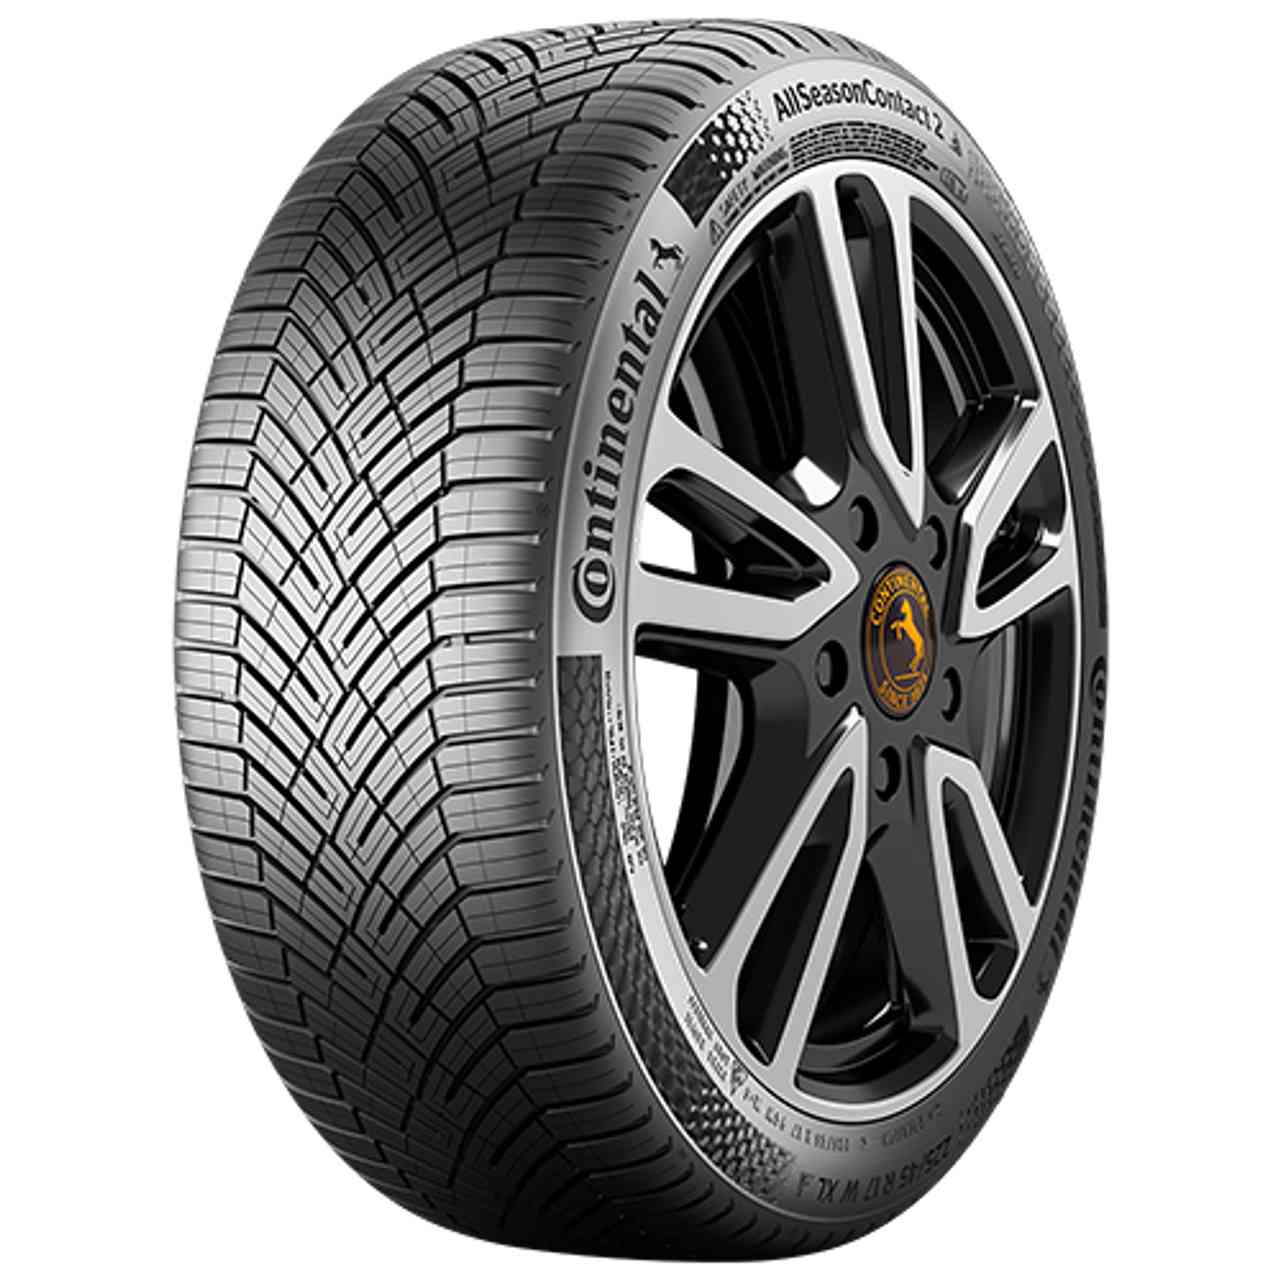 CONTINENTAL ALLSEASONCONTACT 2 (EVc) 215/50R18 92W FR BSW